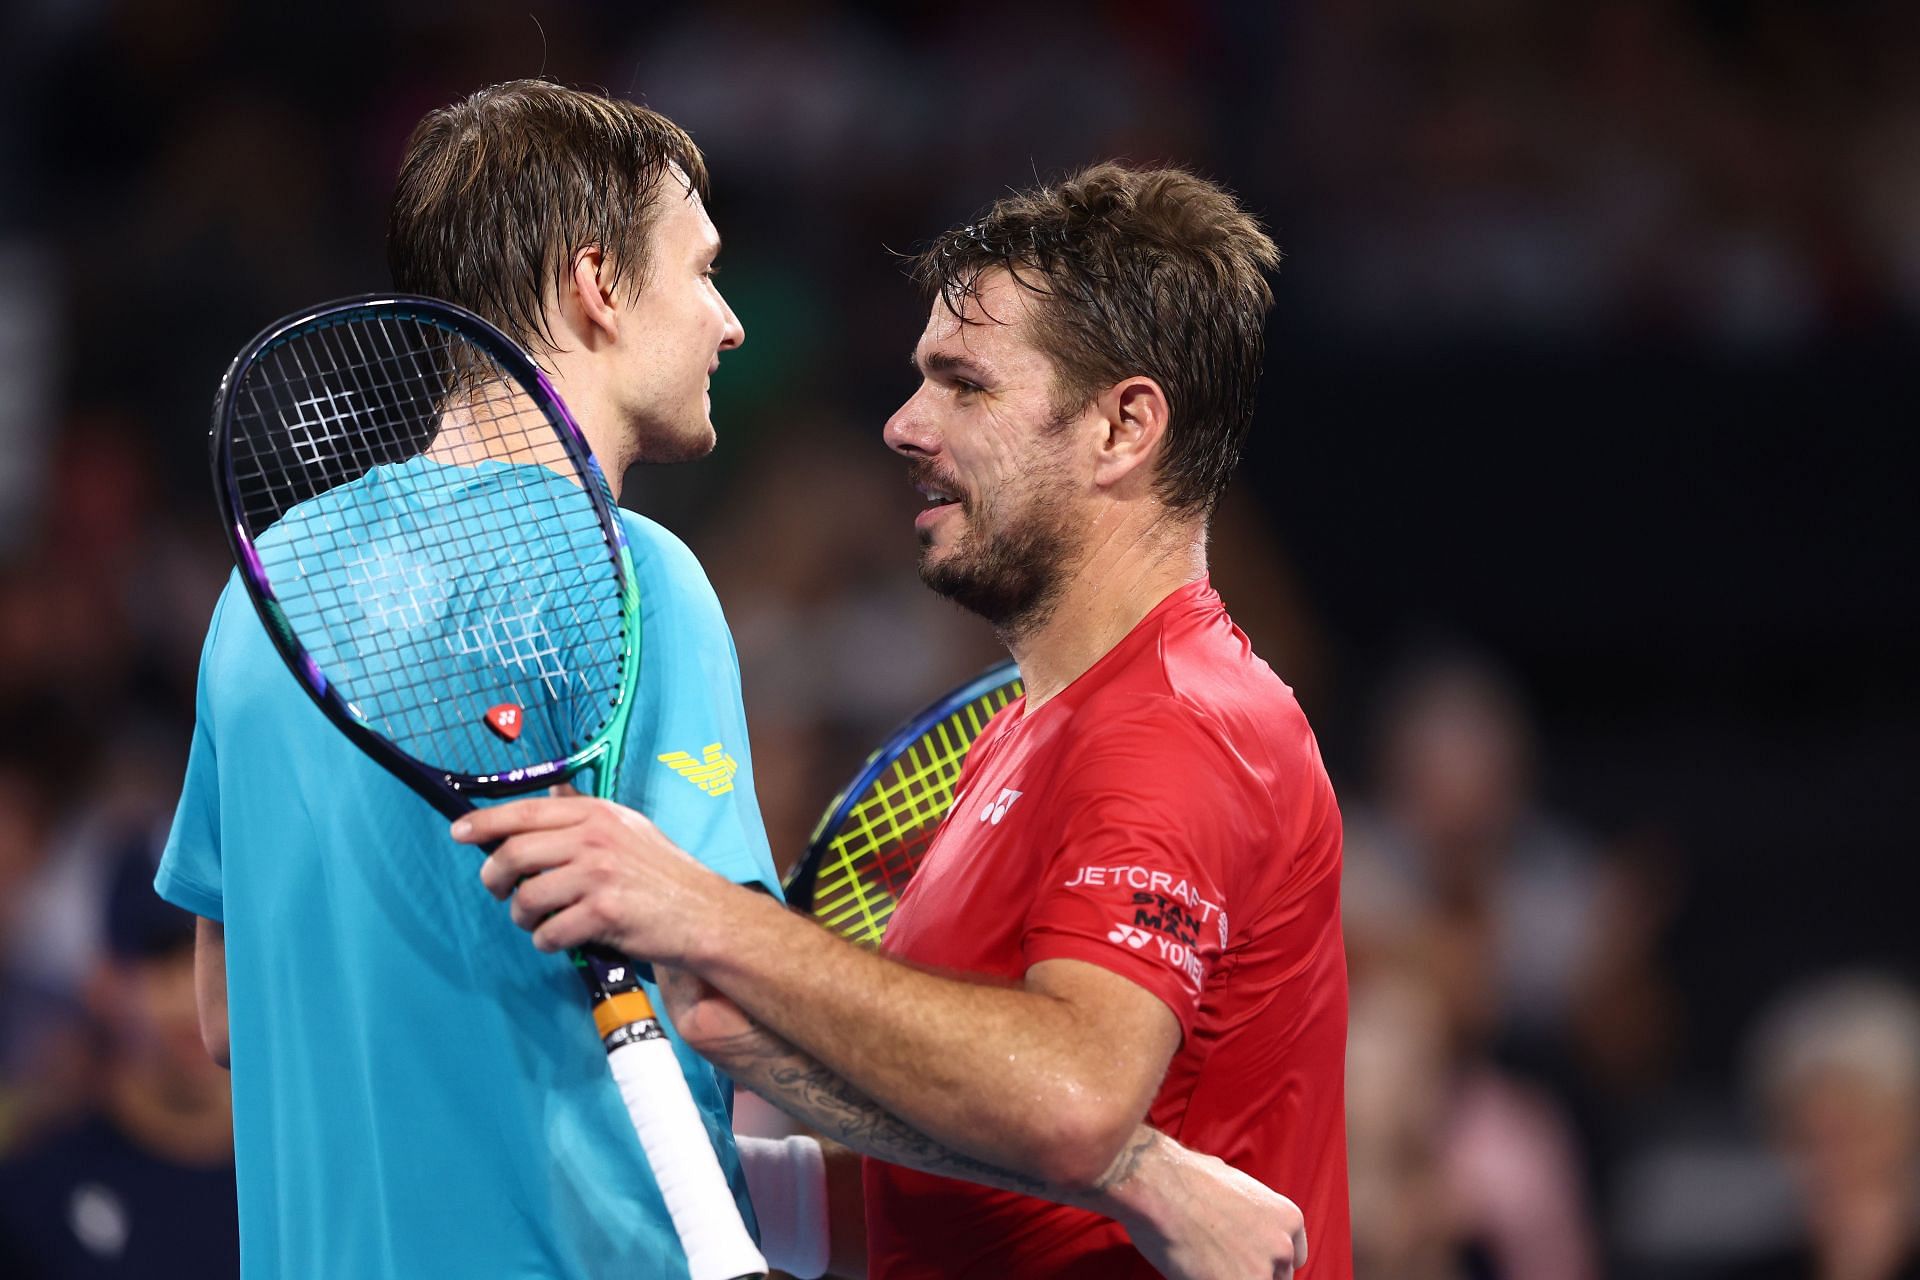 Wawrinka and Bublik after their match at the 2022 United Cup